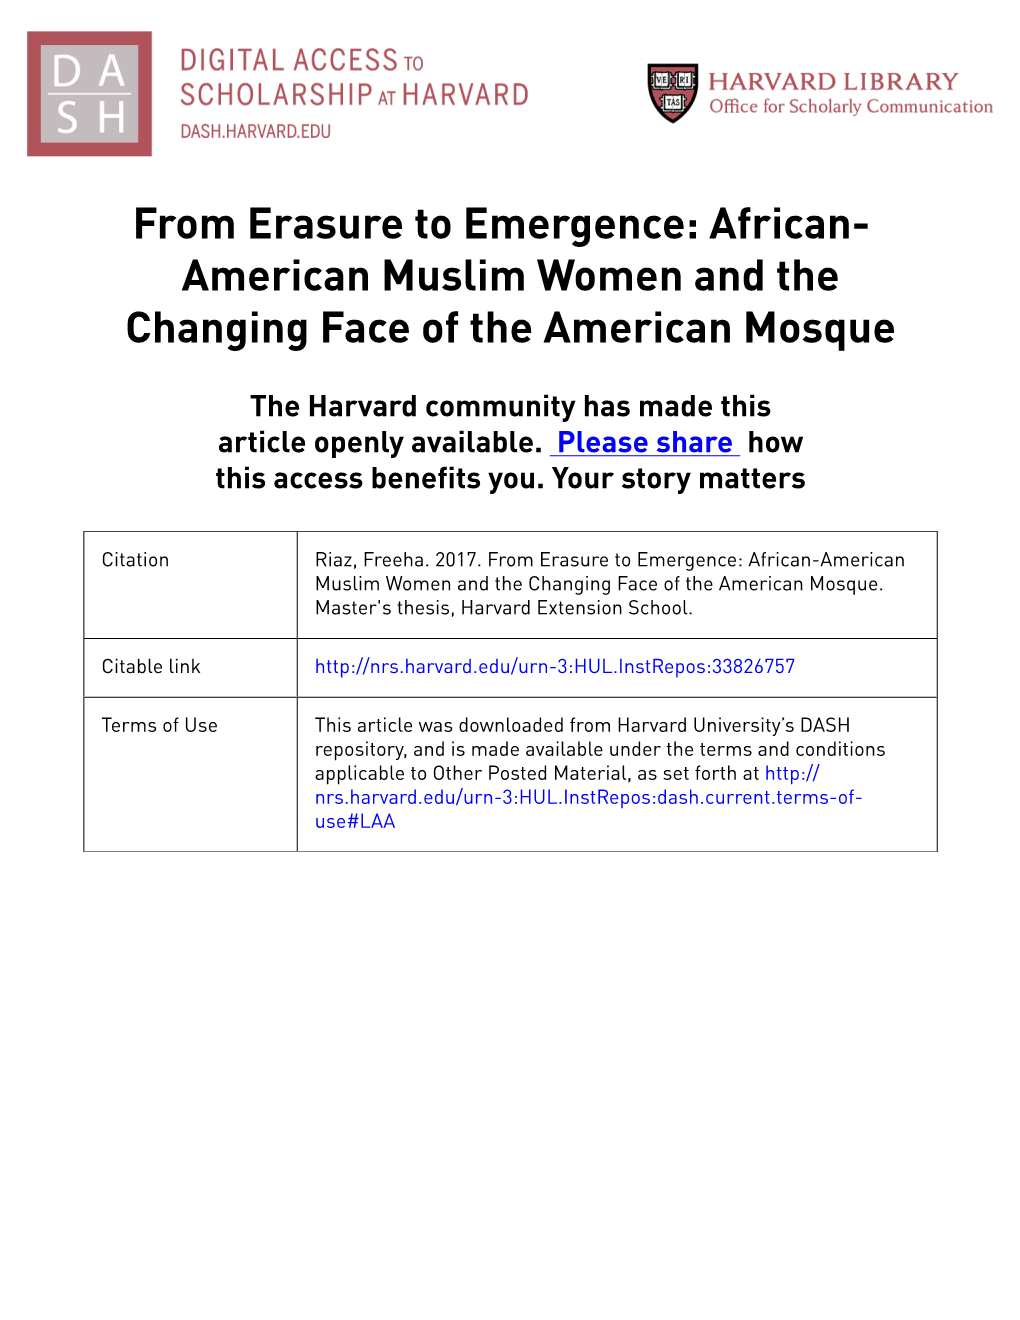 African- American Muslim Women and the Changing Face of the American Mosque